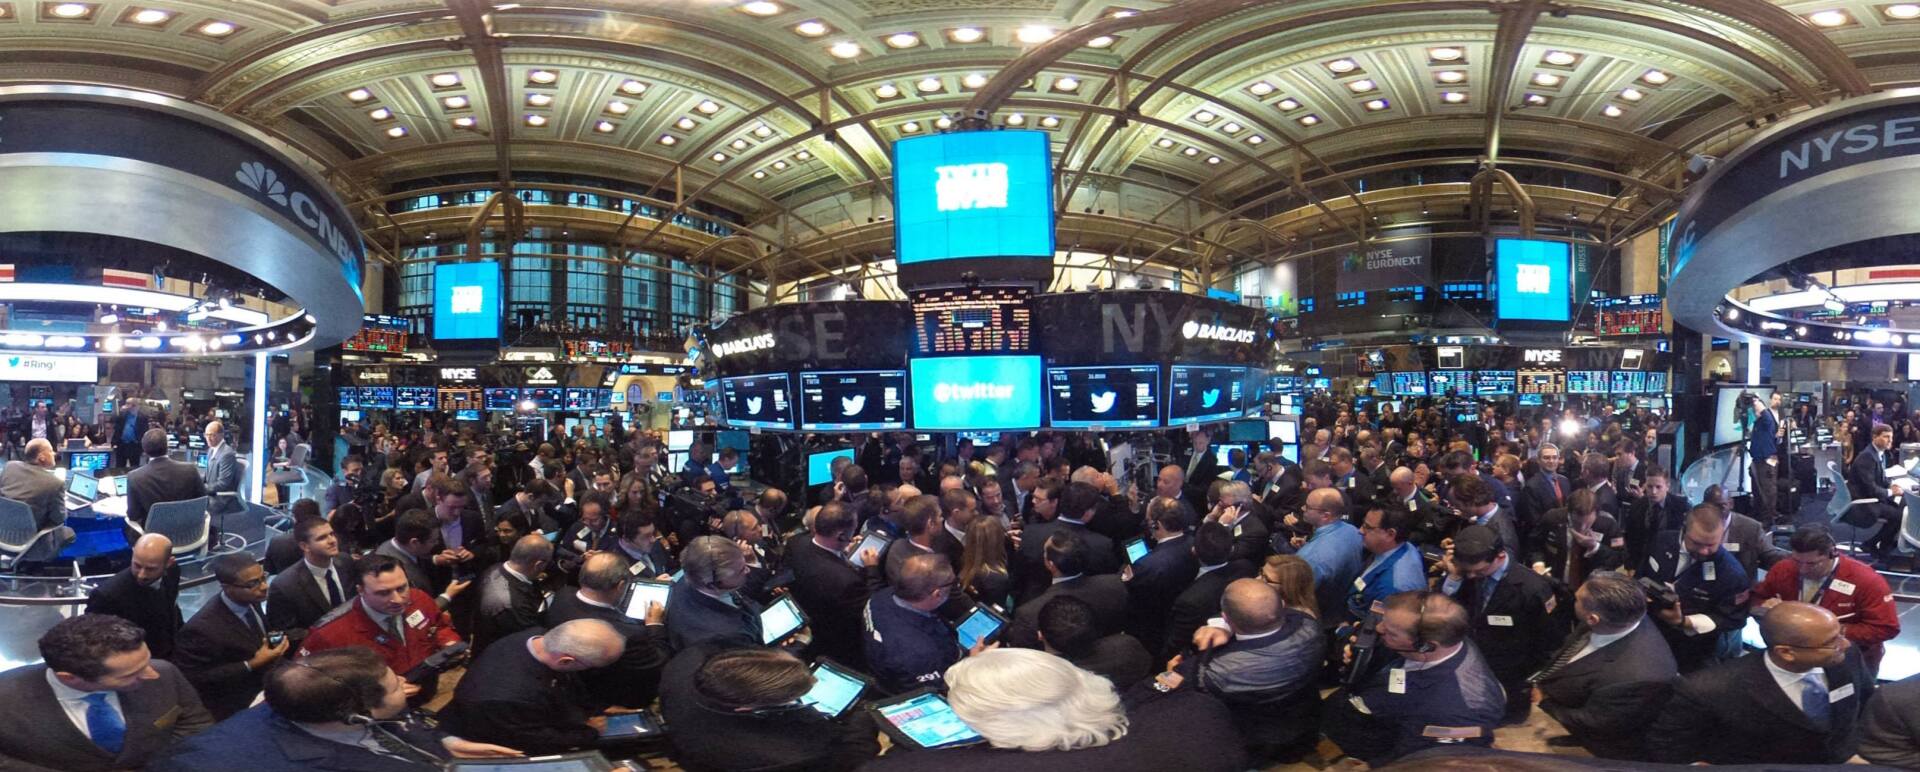 
World’s Largest Stock Exchange: The New York Stock Exchange sets world record